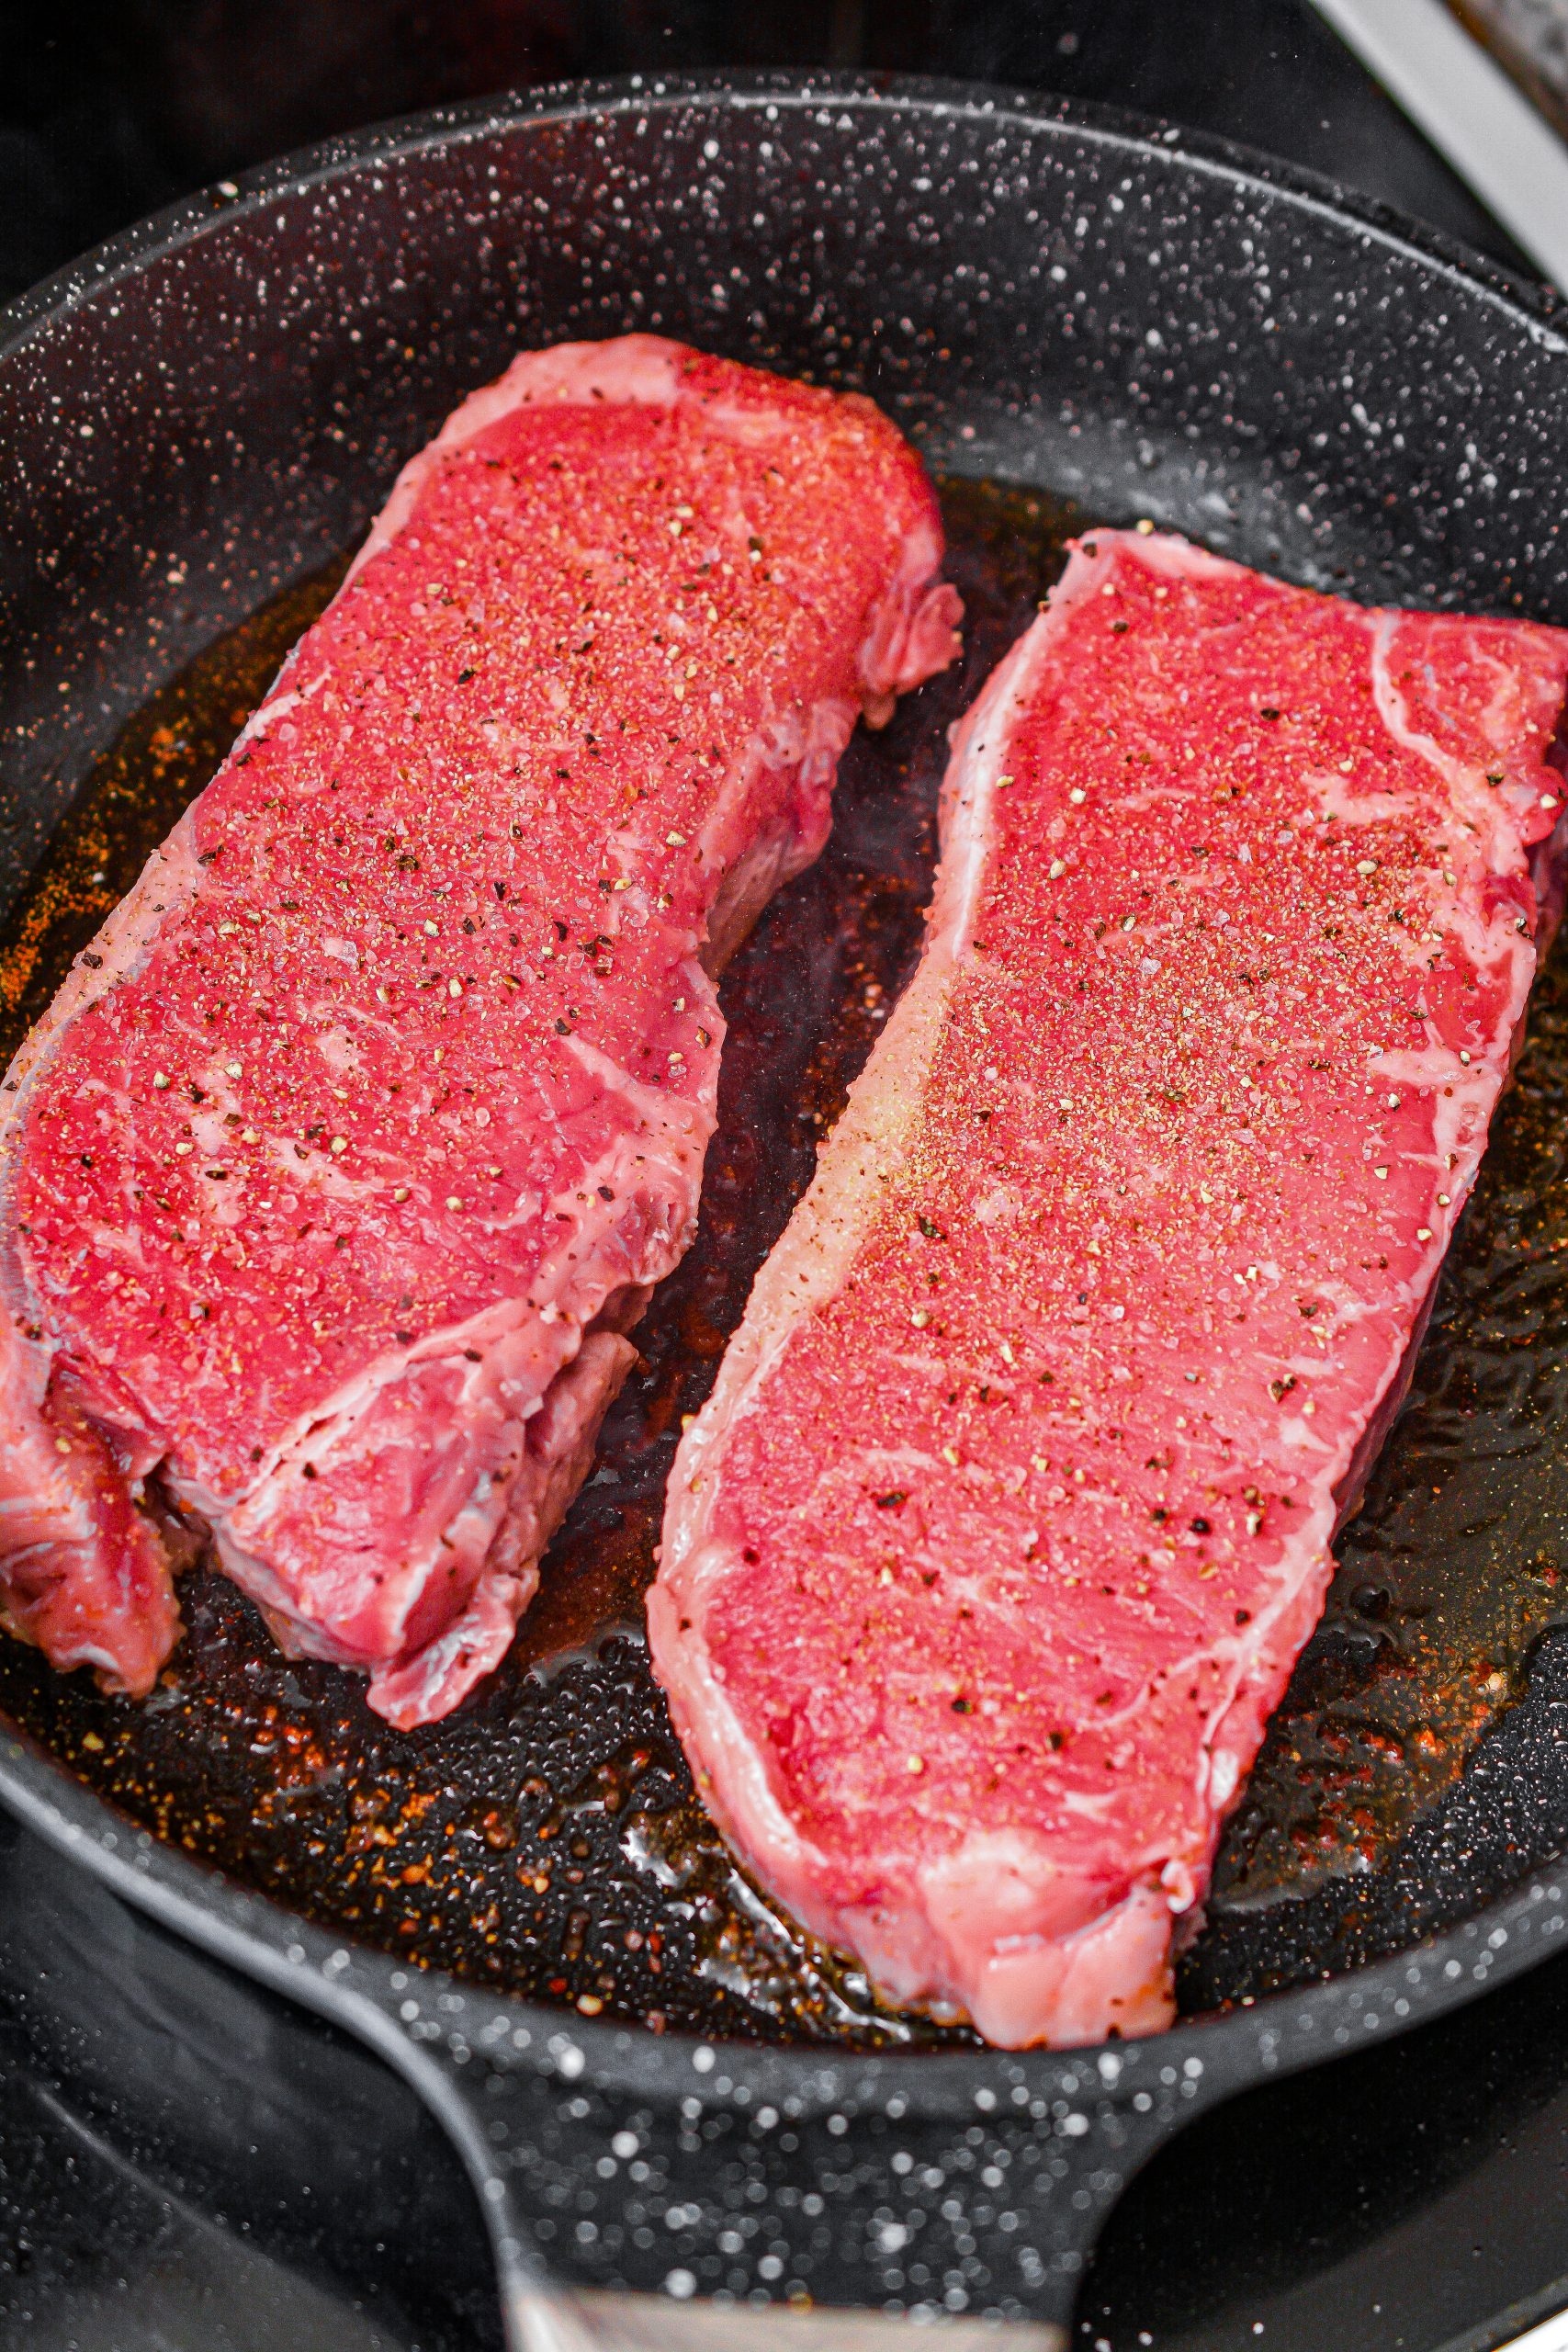 Heat 1 Tbsp. oil in a skillet over medium-high heat, and cook the steak seasoned with salt, pepper, and garlic powder, until done to your liking.